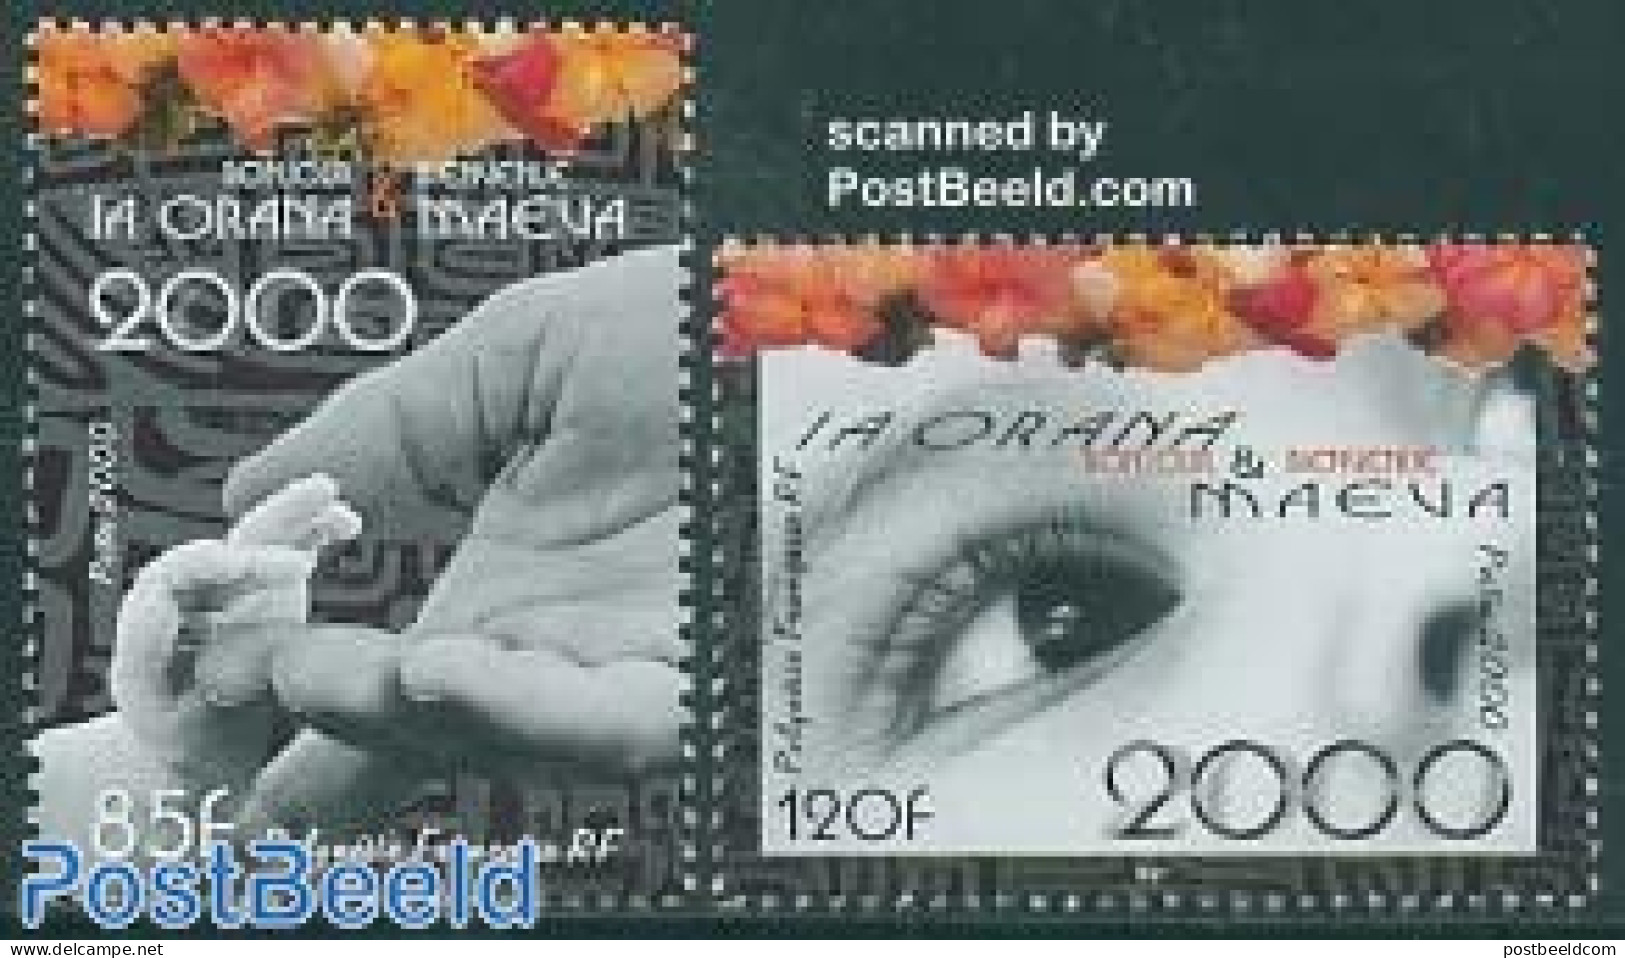 French Polynesia 2000 The Year 2000 2v, Mint NH, Various - New Year - Nuevos